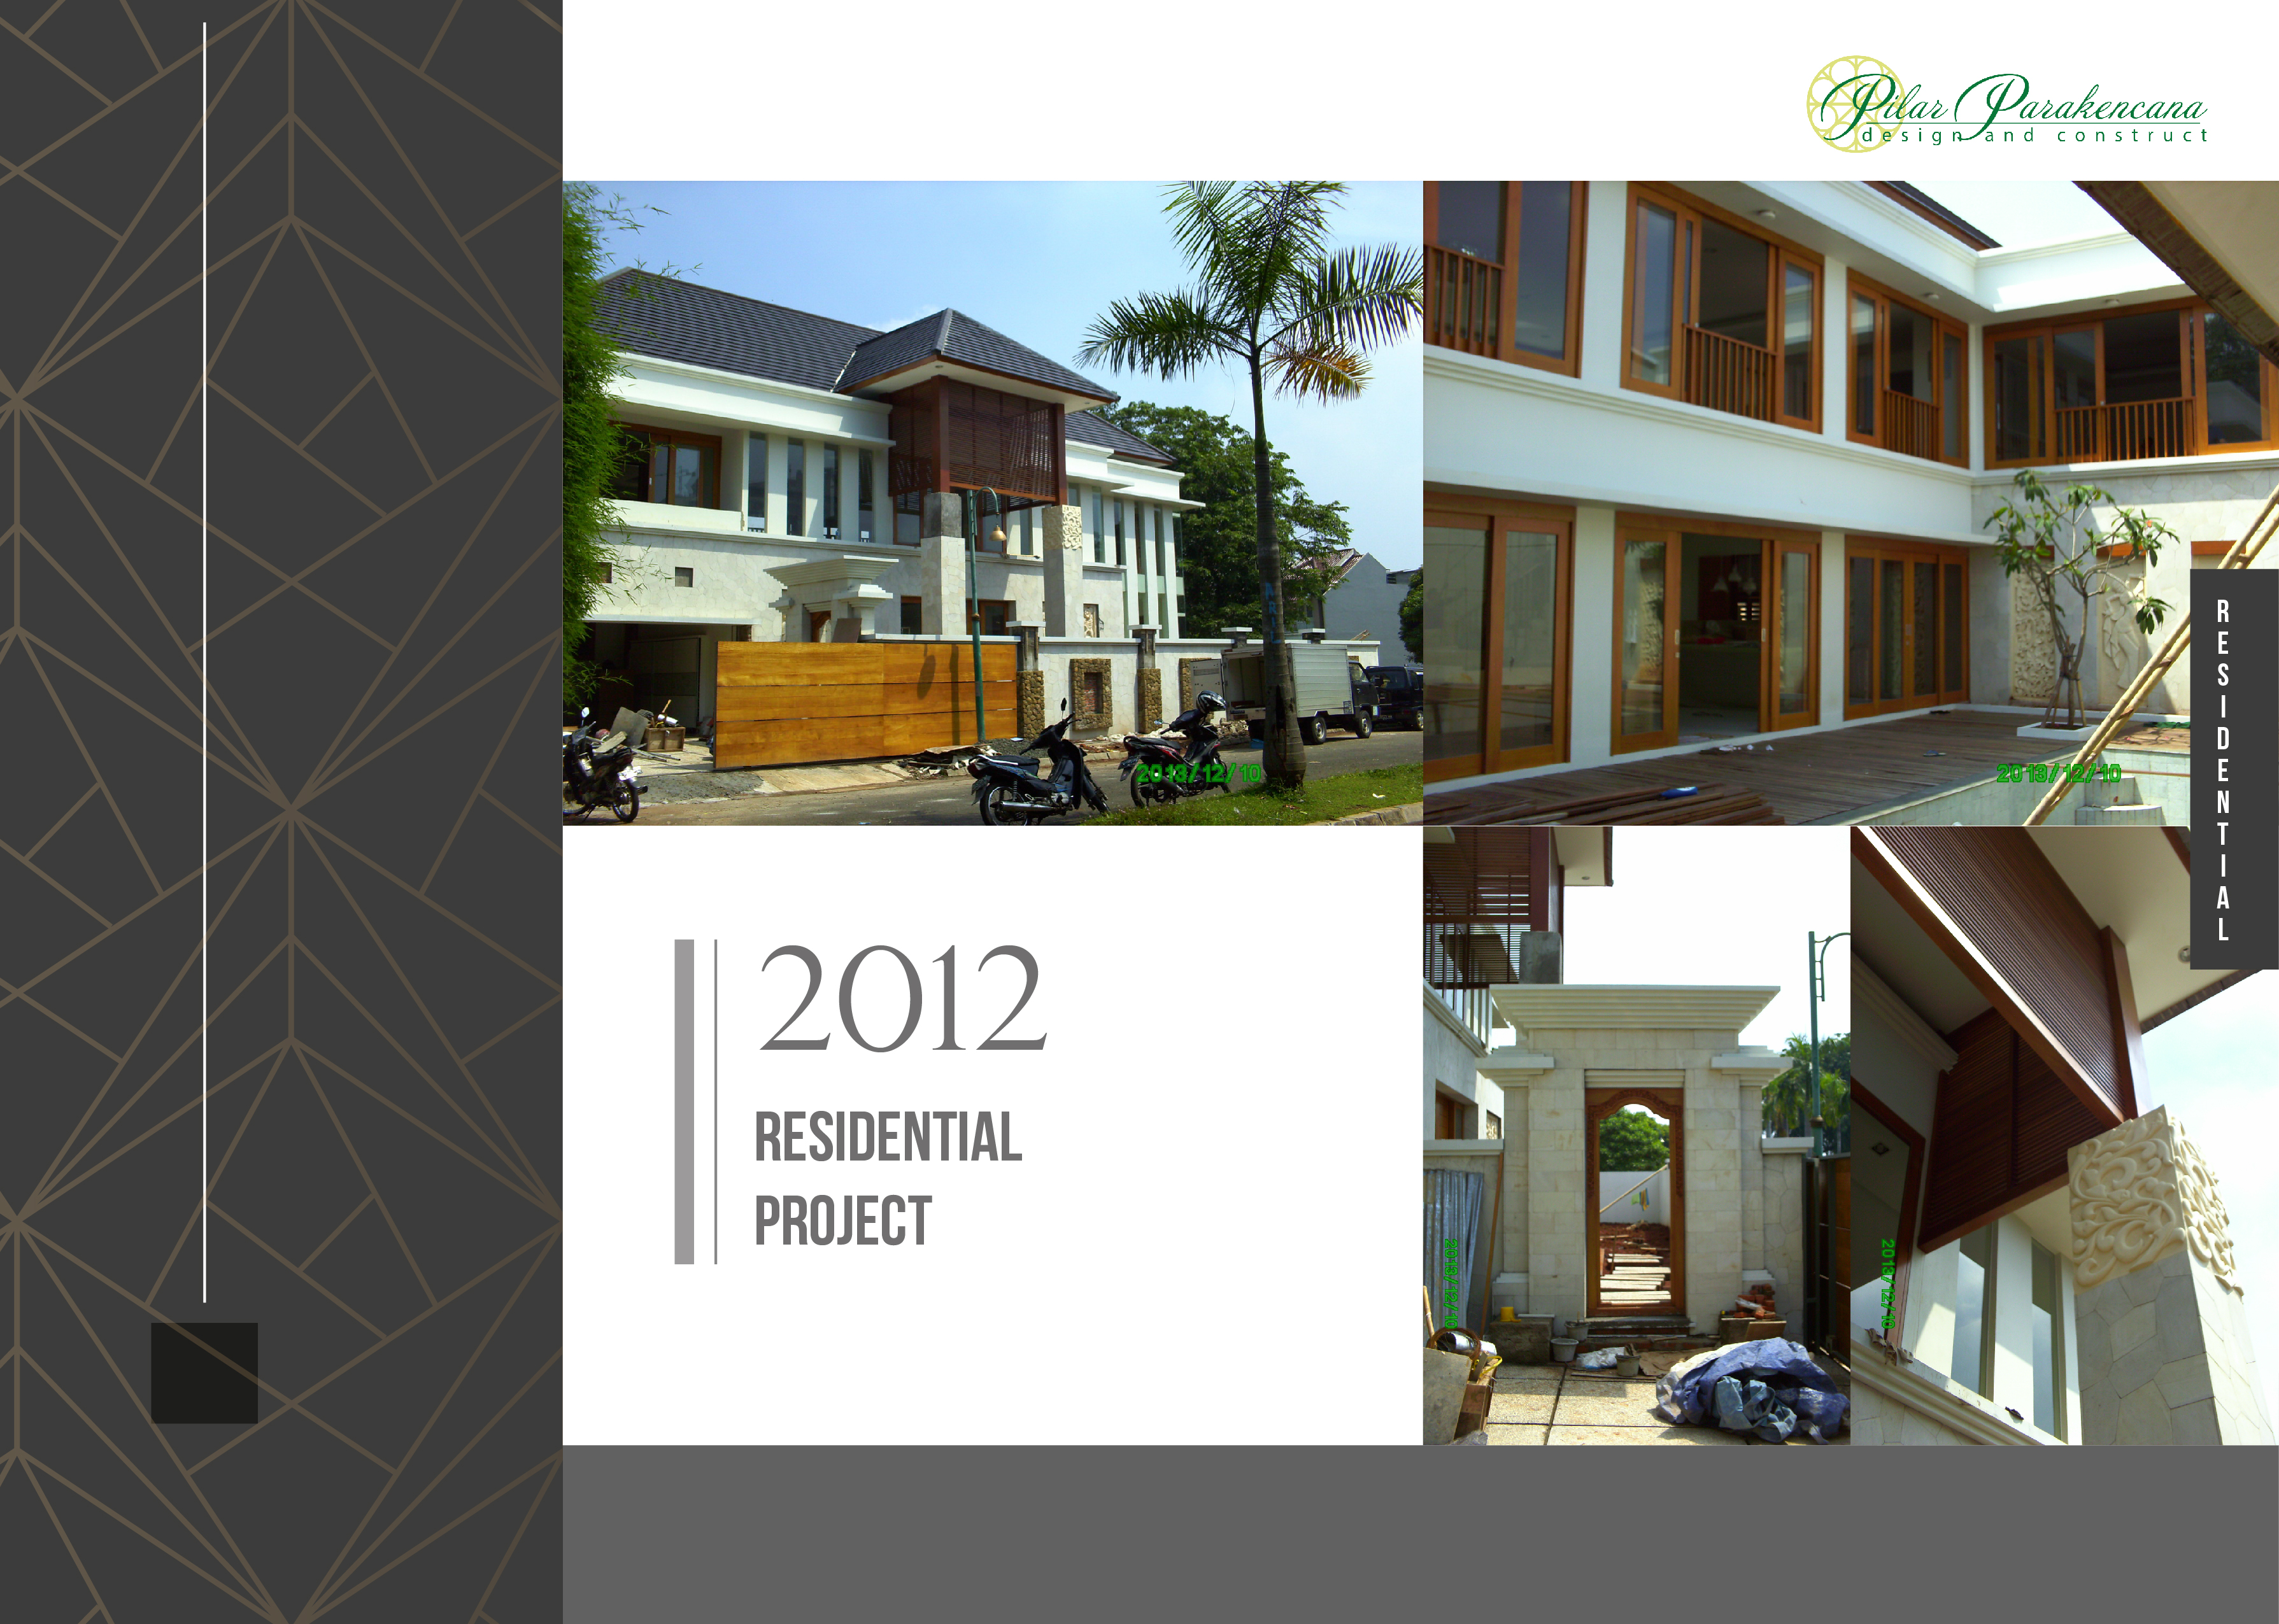 Residential Project - 2012